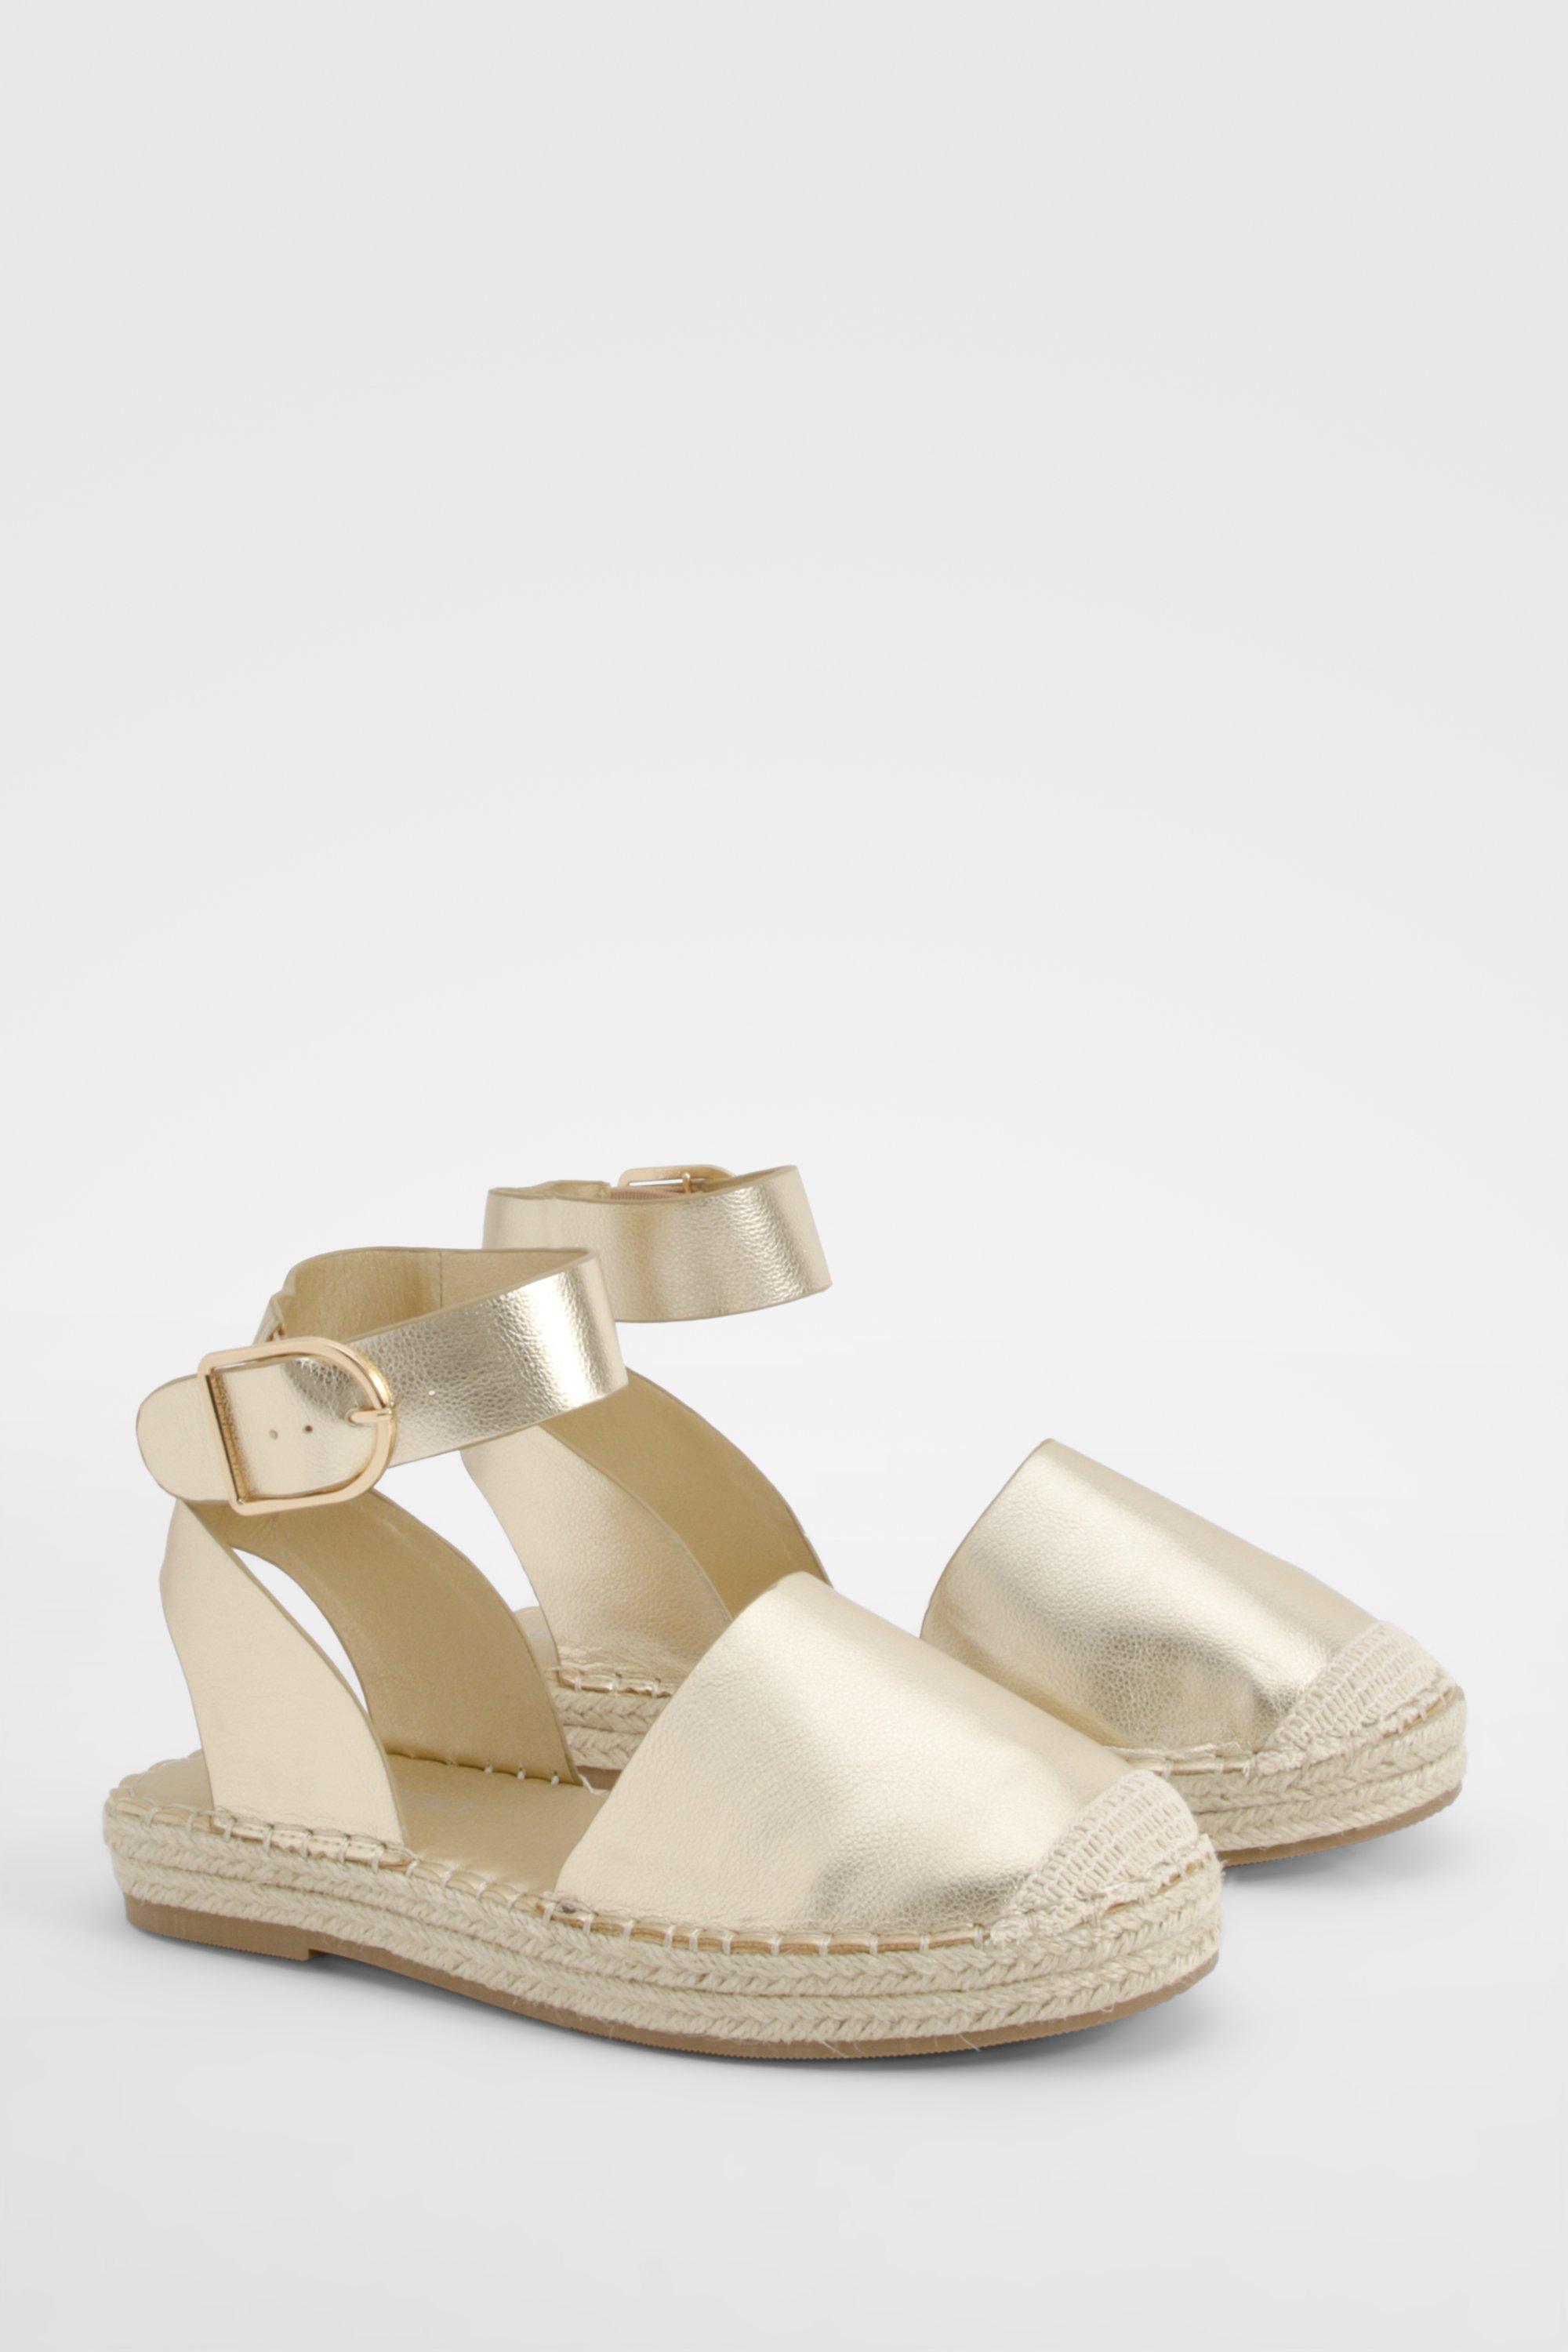 Boohoo Wide Fit Closed Toe Buckle Detail Espadrilles, Gold